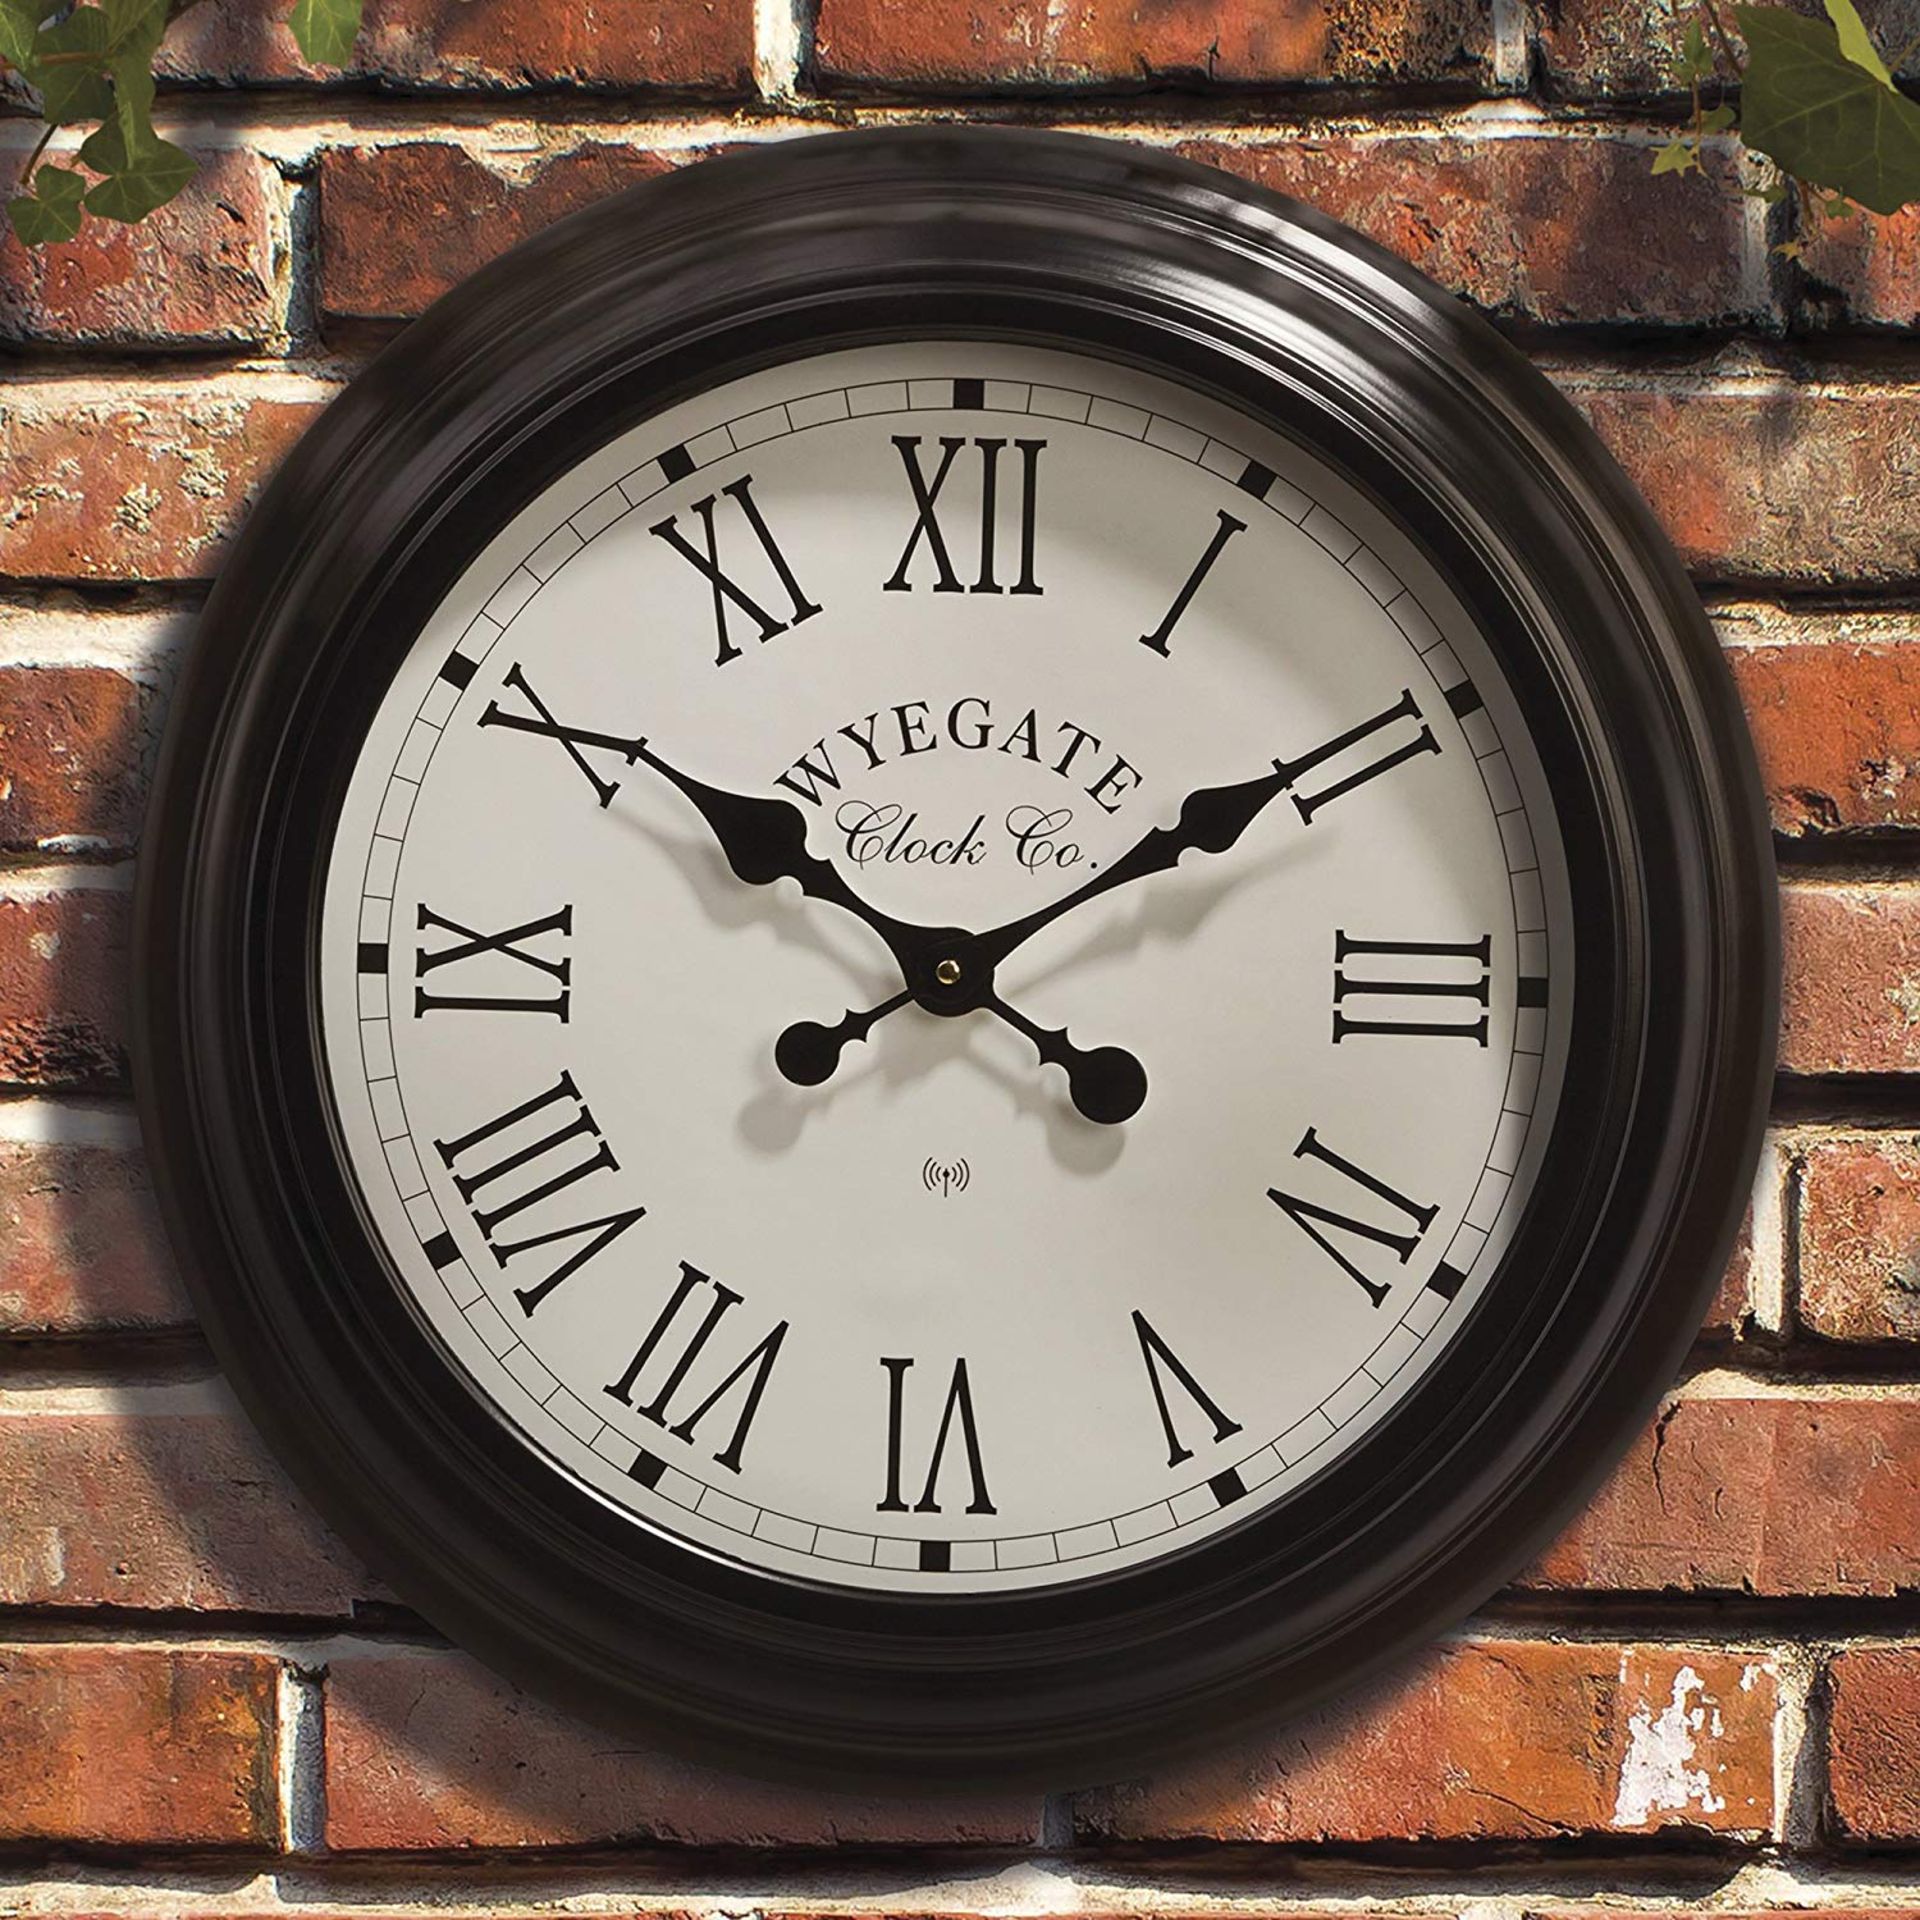 V Brand New Large Wyegate Garden/Indoor Clock (Radio Controlled) - 50cm - Black - RRP £29.99 - Roman